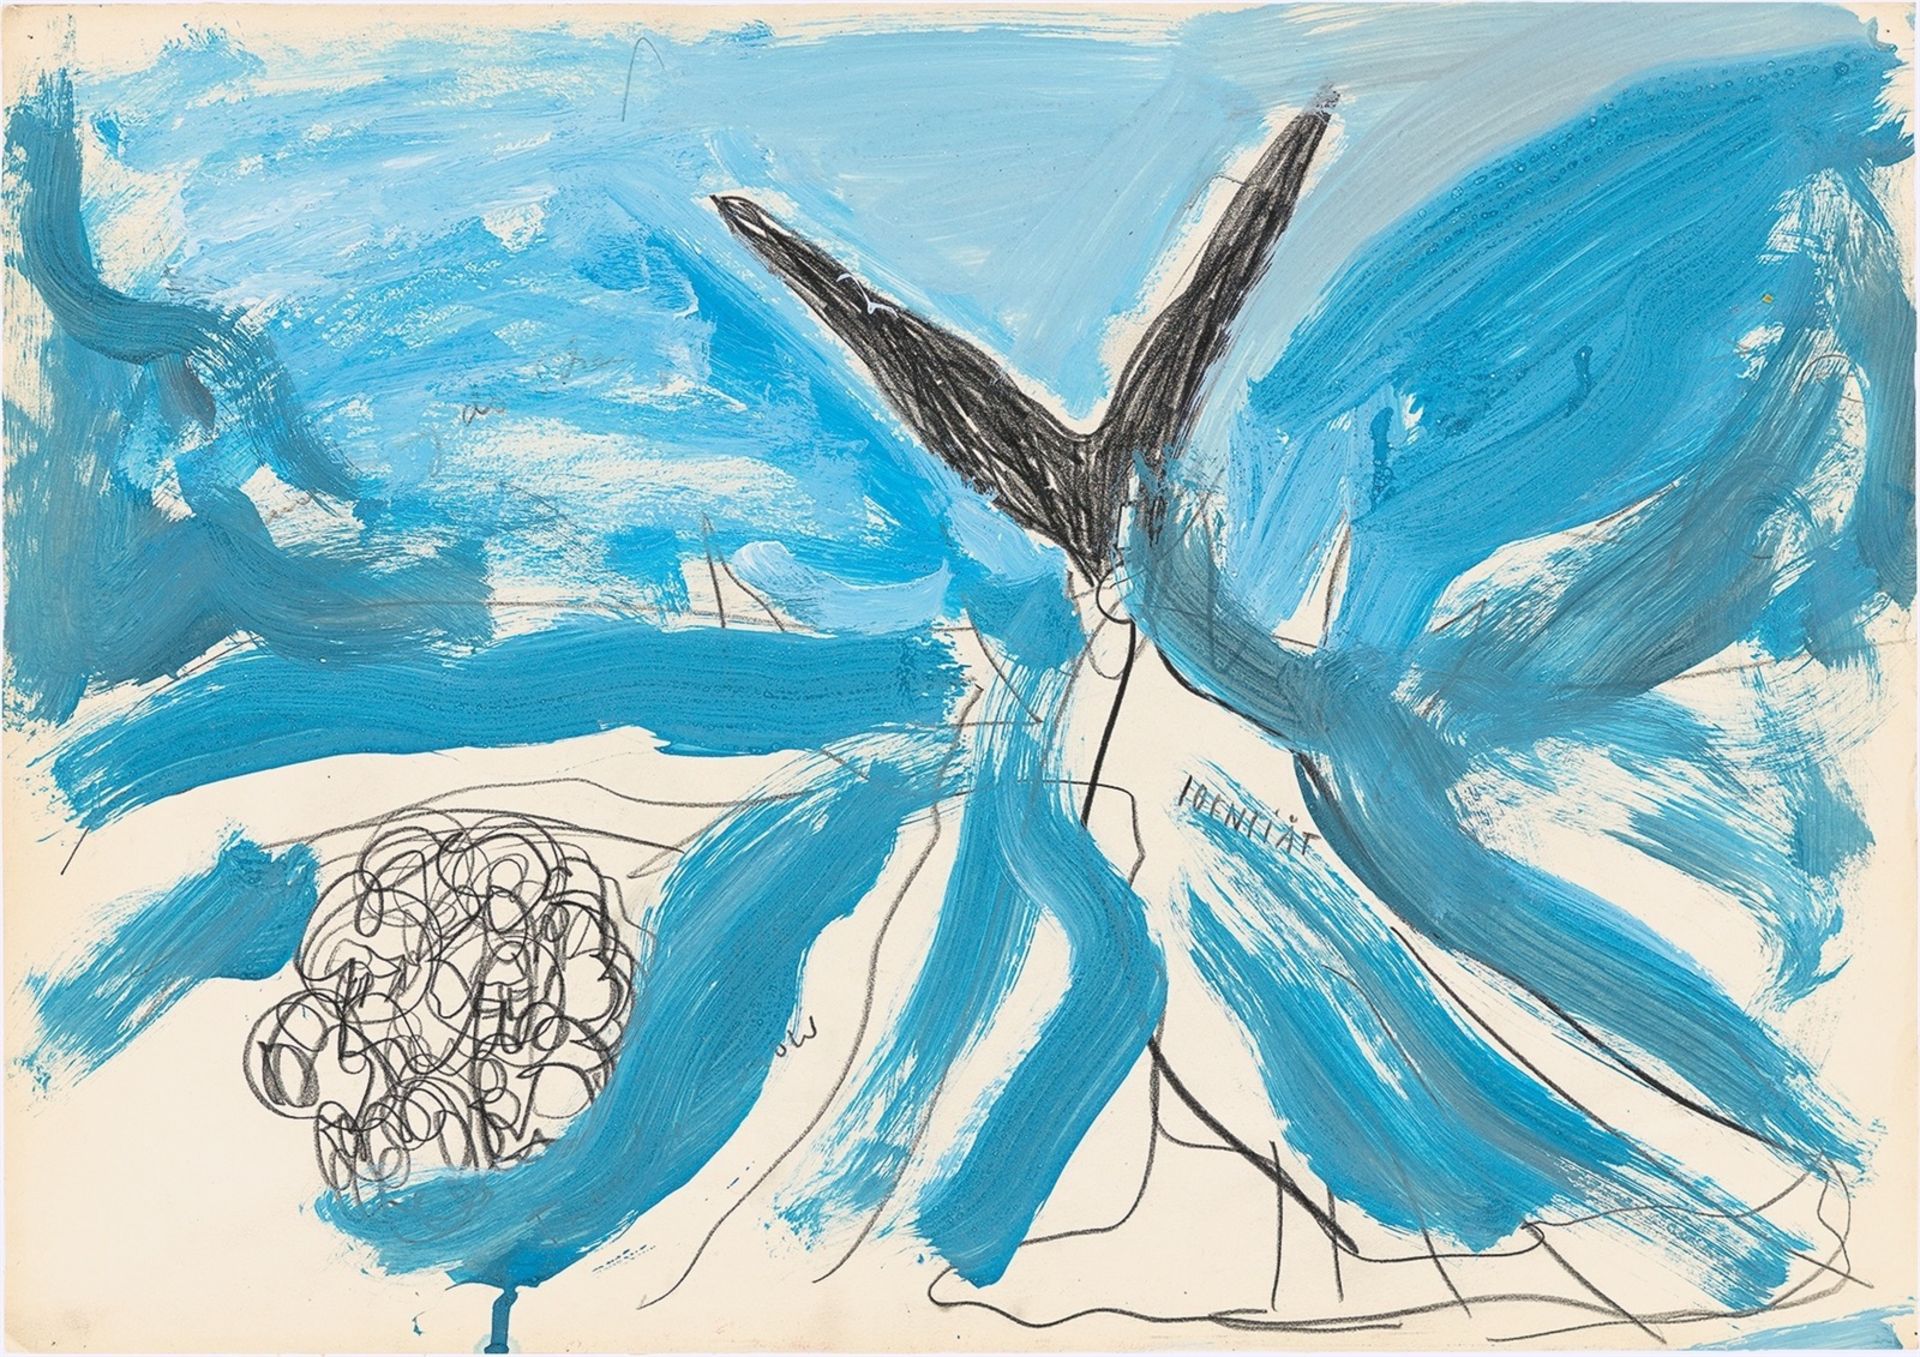 A.R. Penck. Untitled. 1975/76 - Image 9 of 10